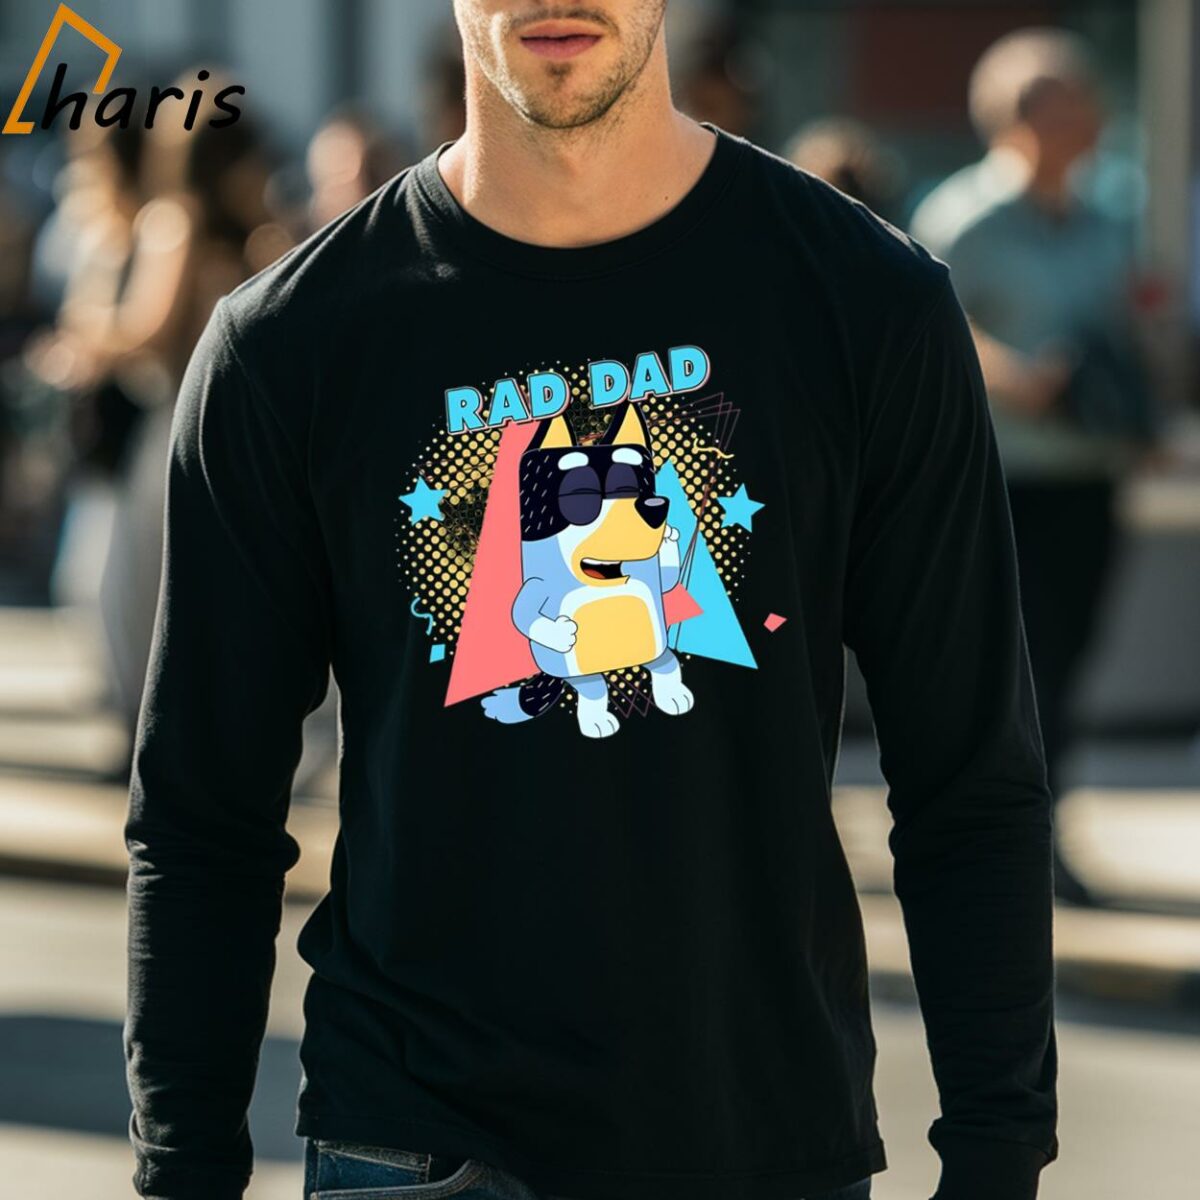 Rad Dad Bluey Shirt Family Bandit Heeler For Dad Fathers Day Gift 4 long sleeve shirt